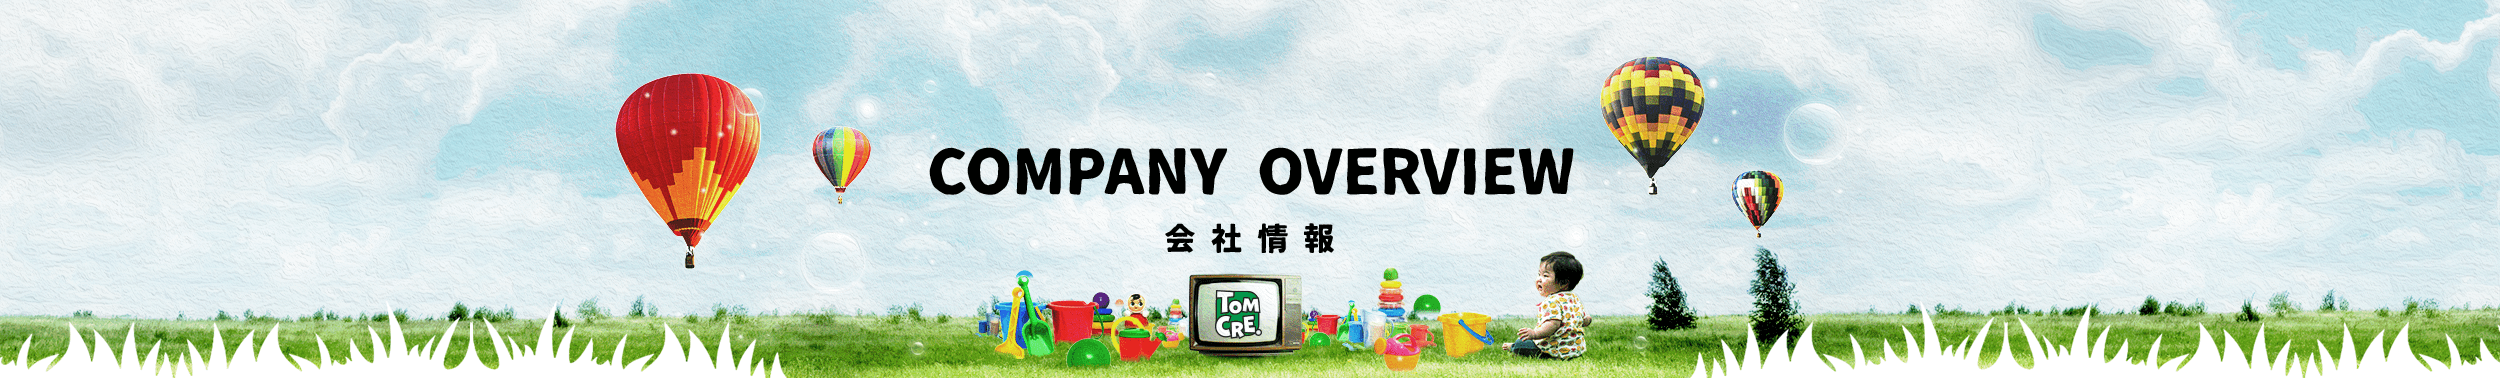 COMPANY OVERVIEW　会社情報